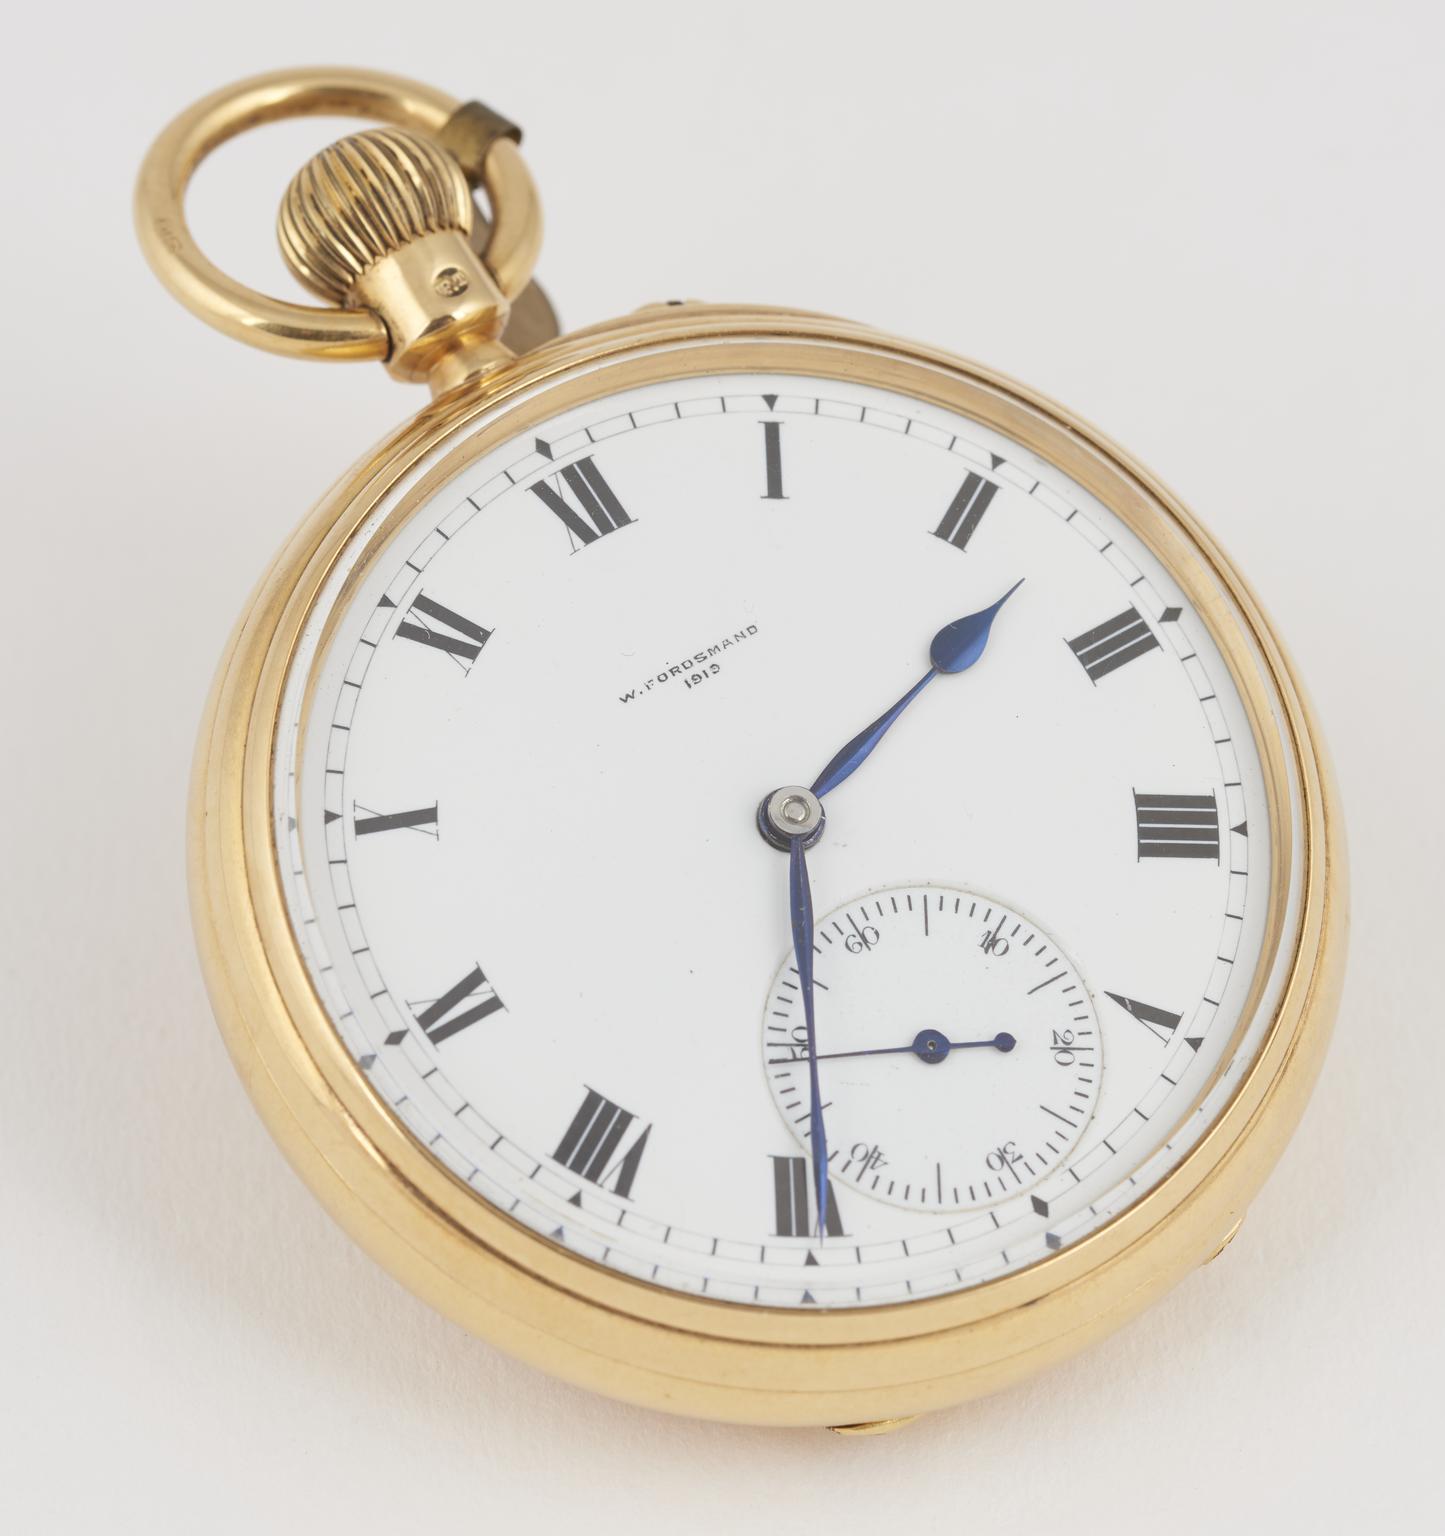 Gold Pocket Watch with Crystal Tourbillon Mechanism by Fordsmand, 1910 (pocket watch)